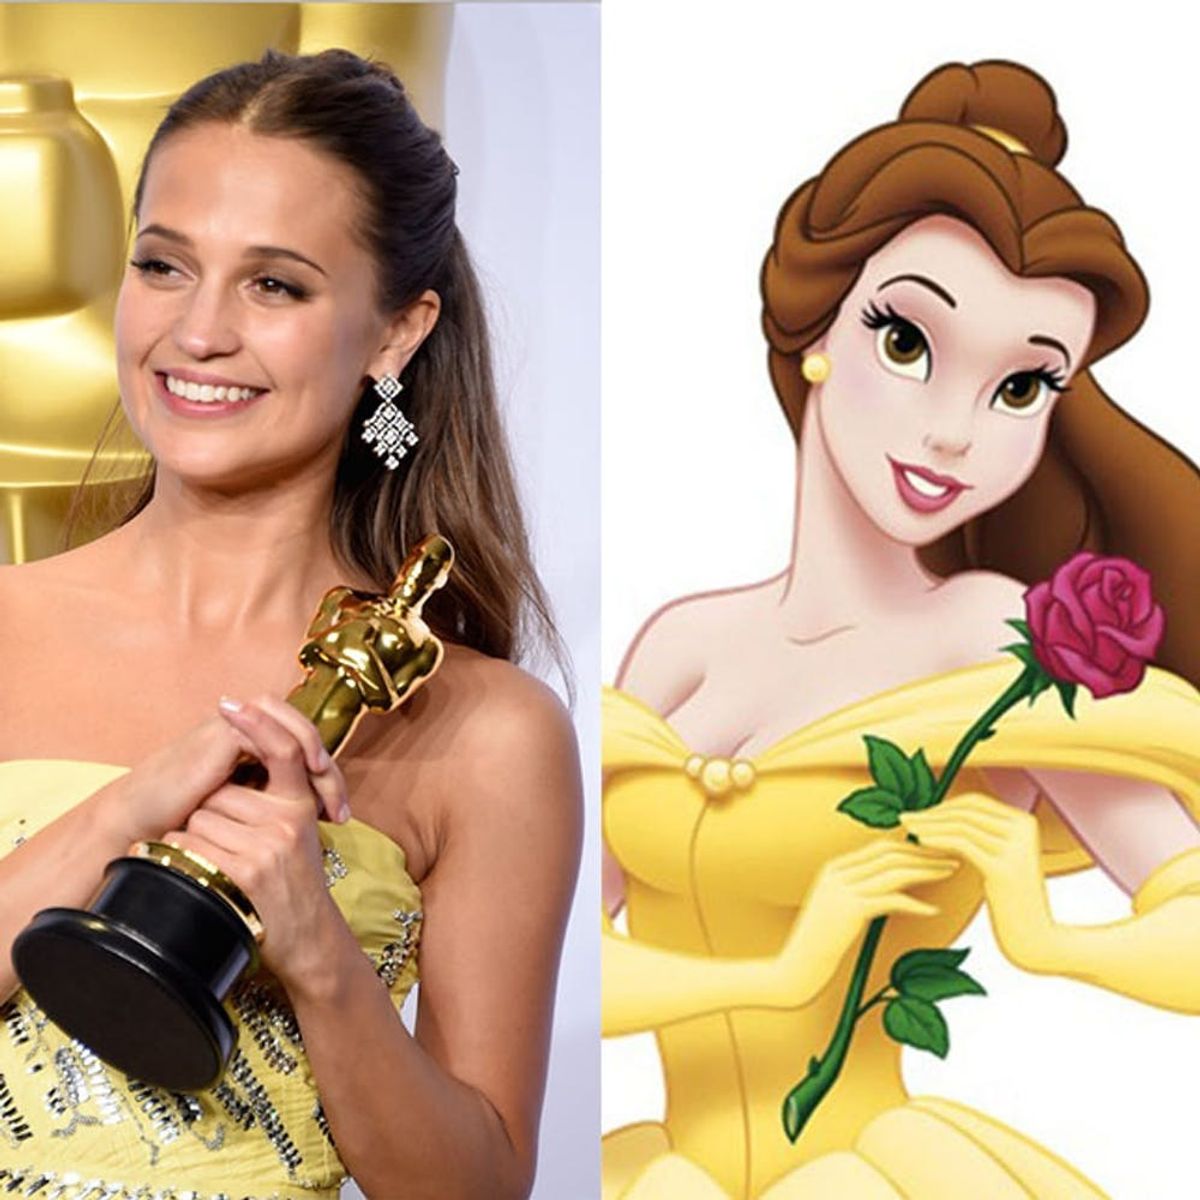 Recreate These Flawless Disney Princess Hairstyles for Prom